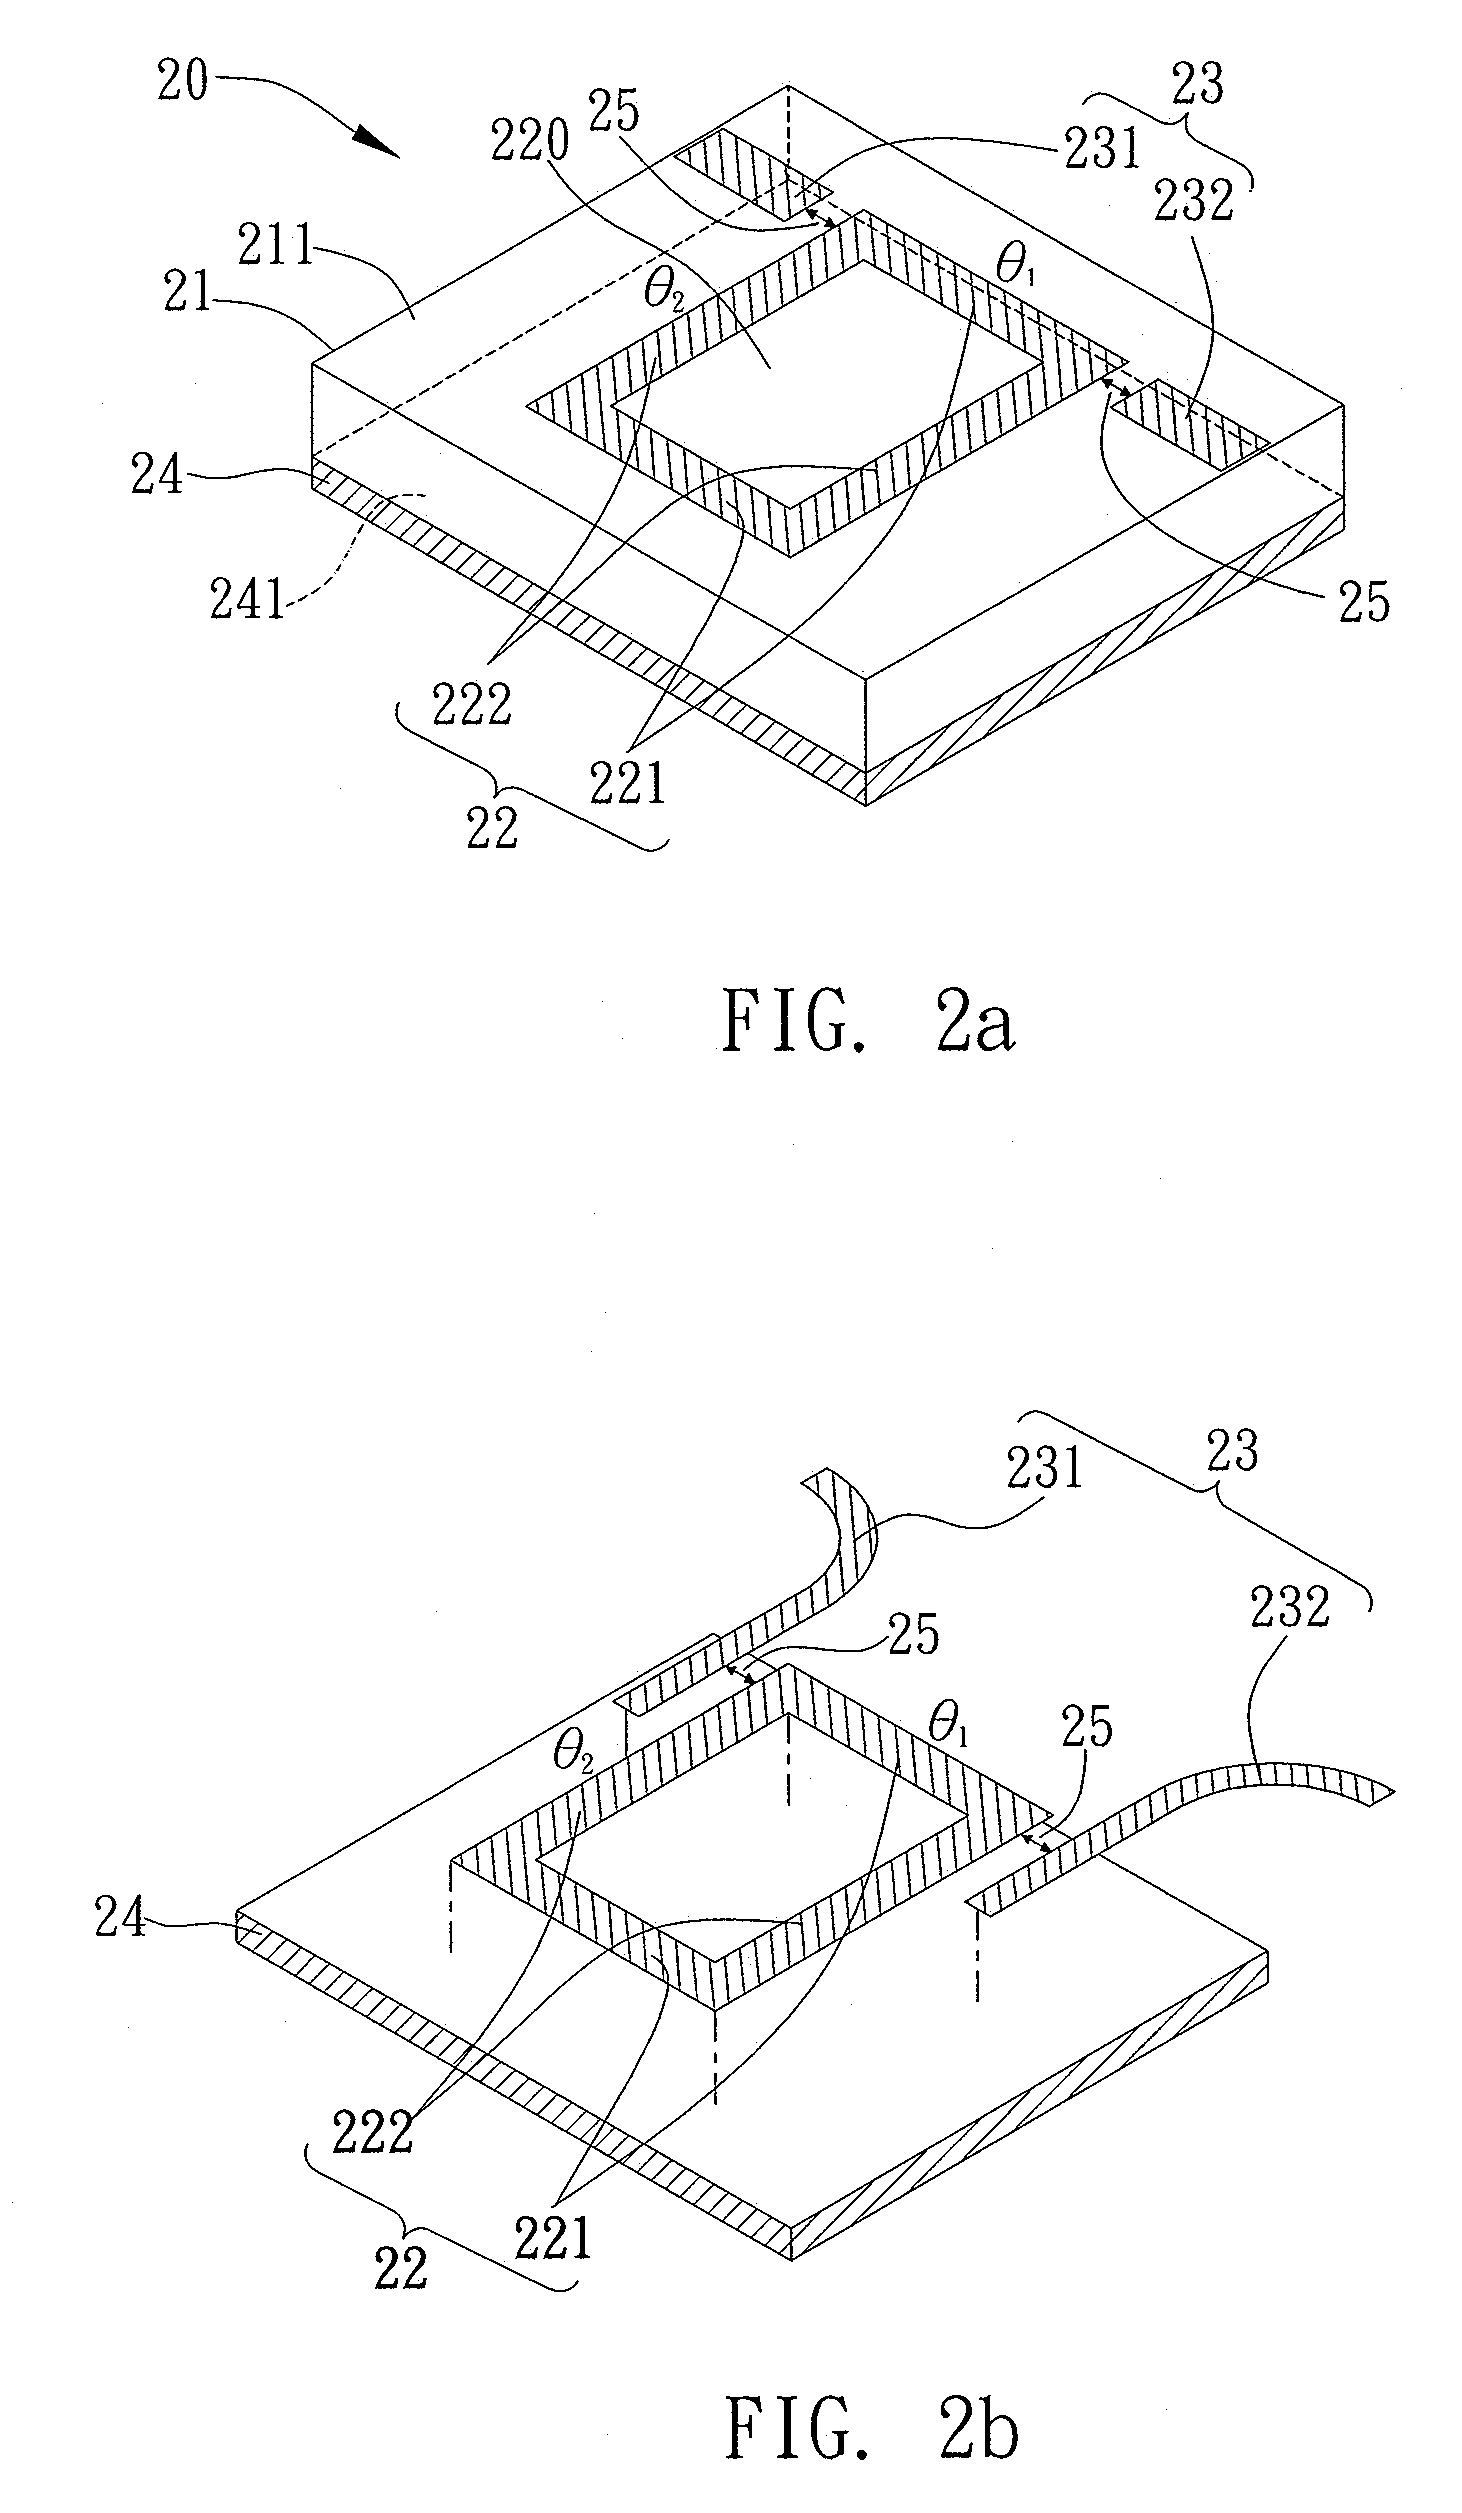 Filter device with finite transmission zeros